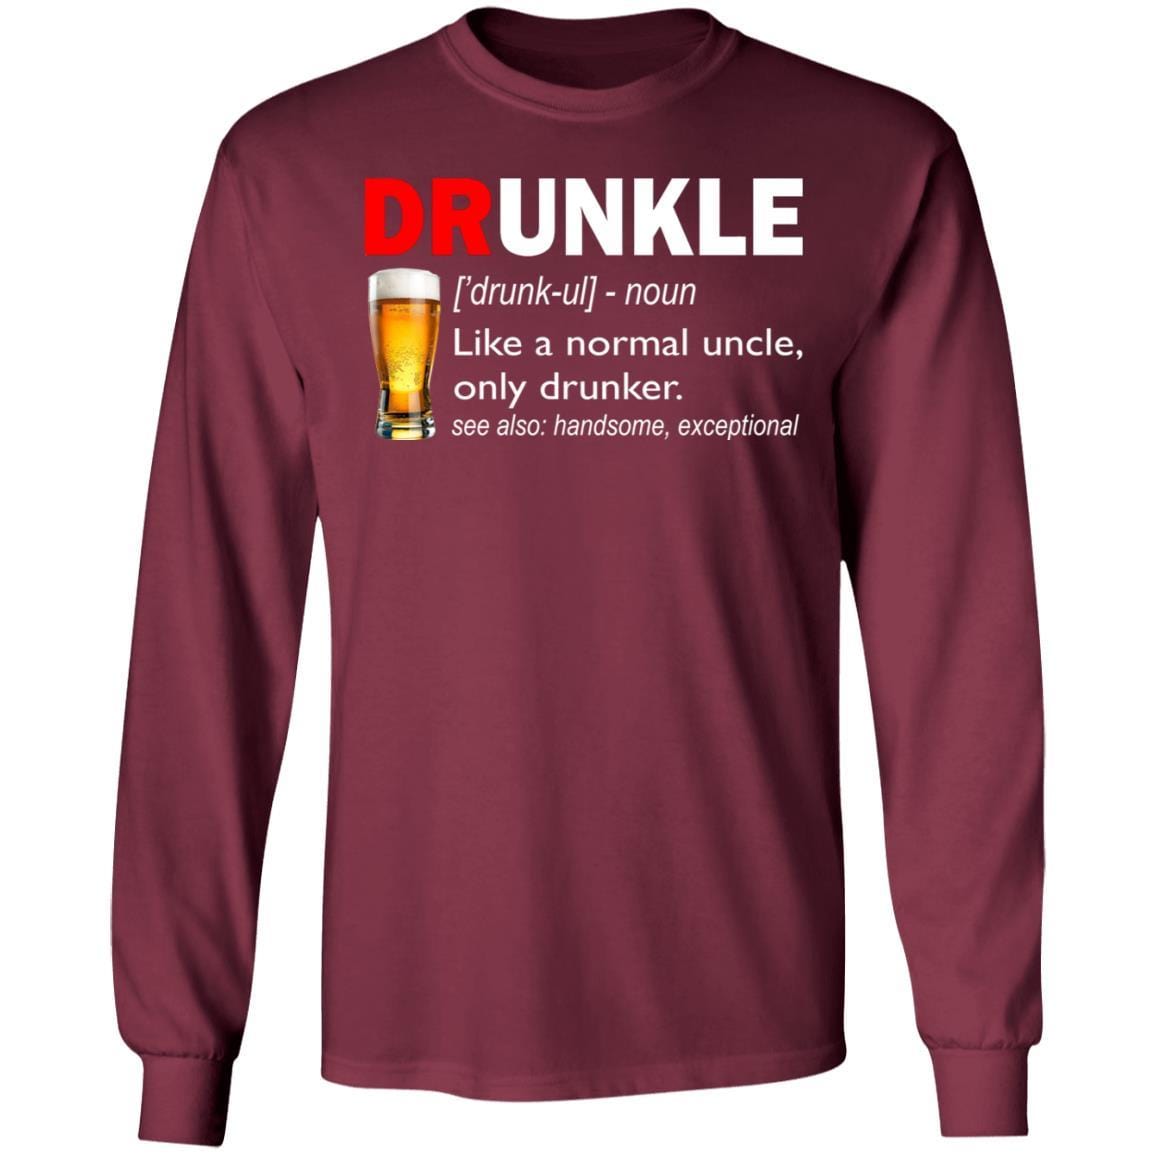 Funny Drunkle T-Shirt Like A Normal Uncle Only Drunker Drunk Uncle Tee ...